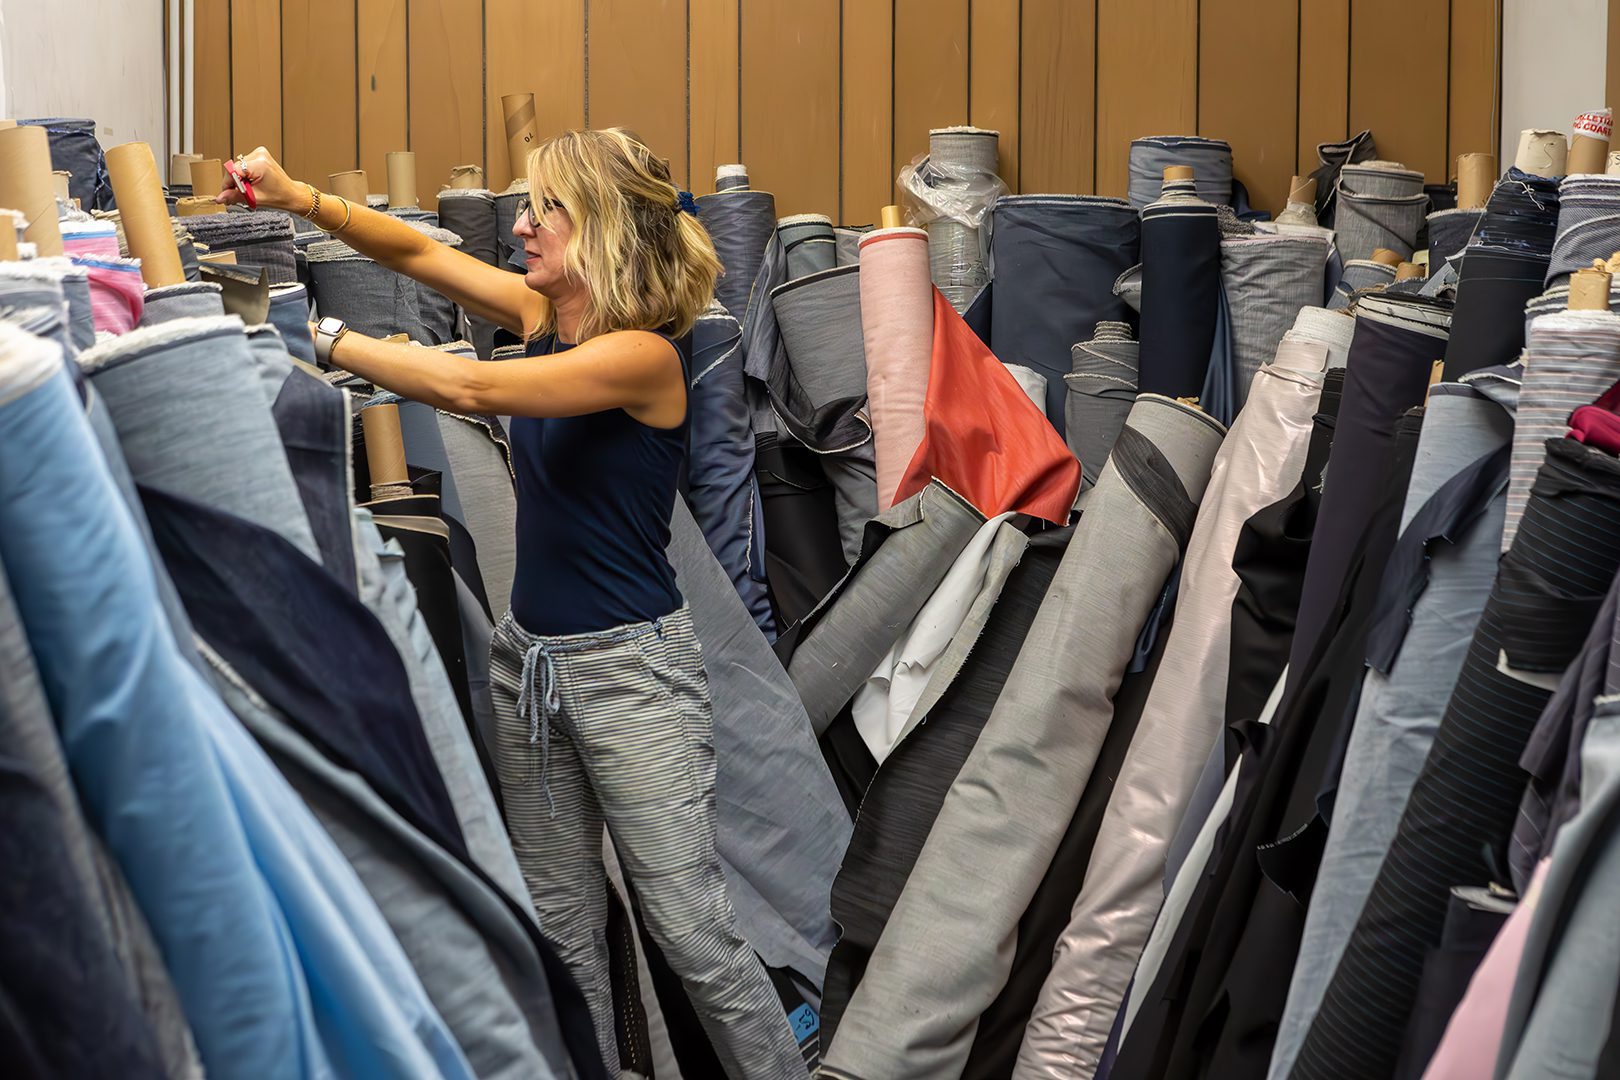 A woman is standing in a room full of fabric.